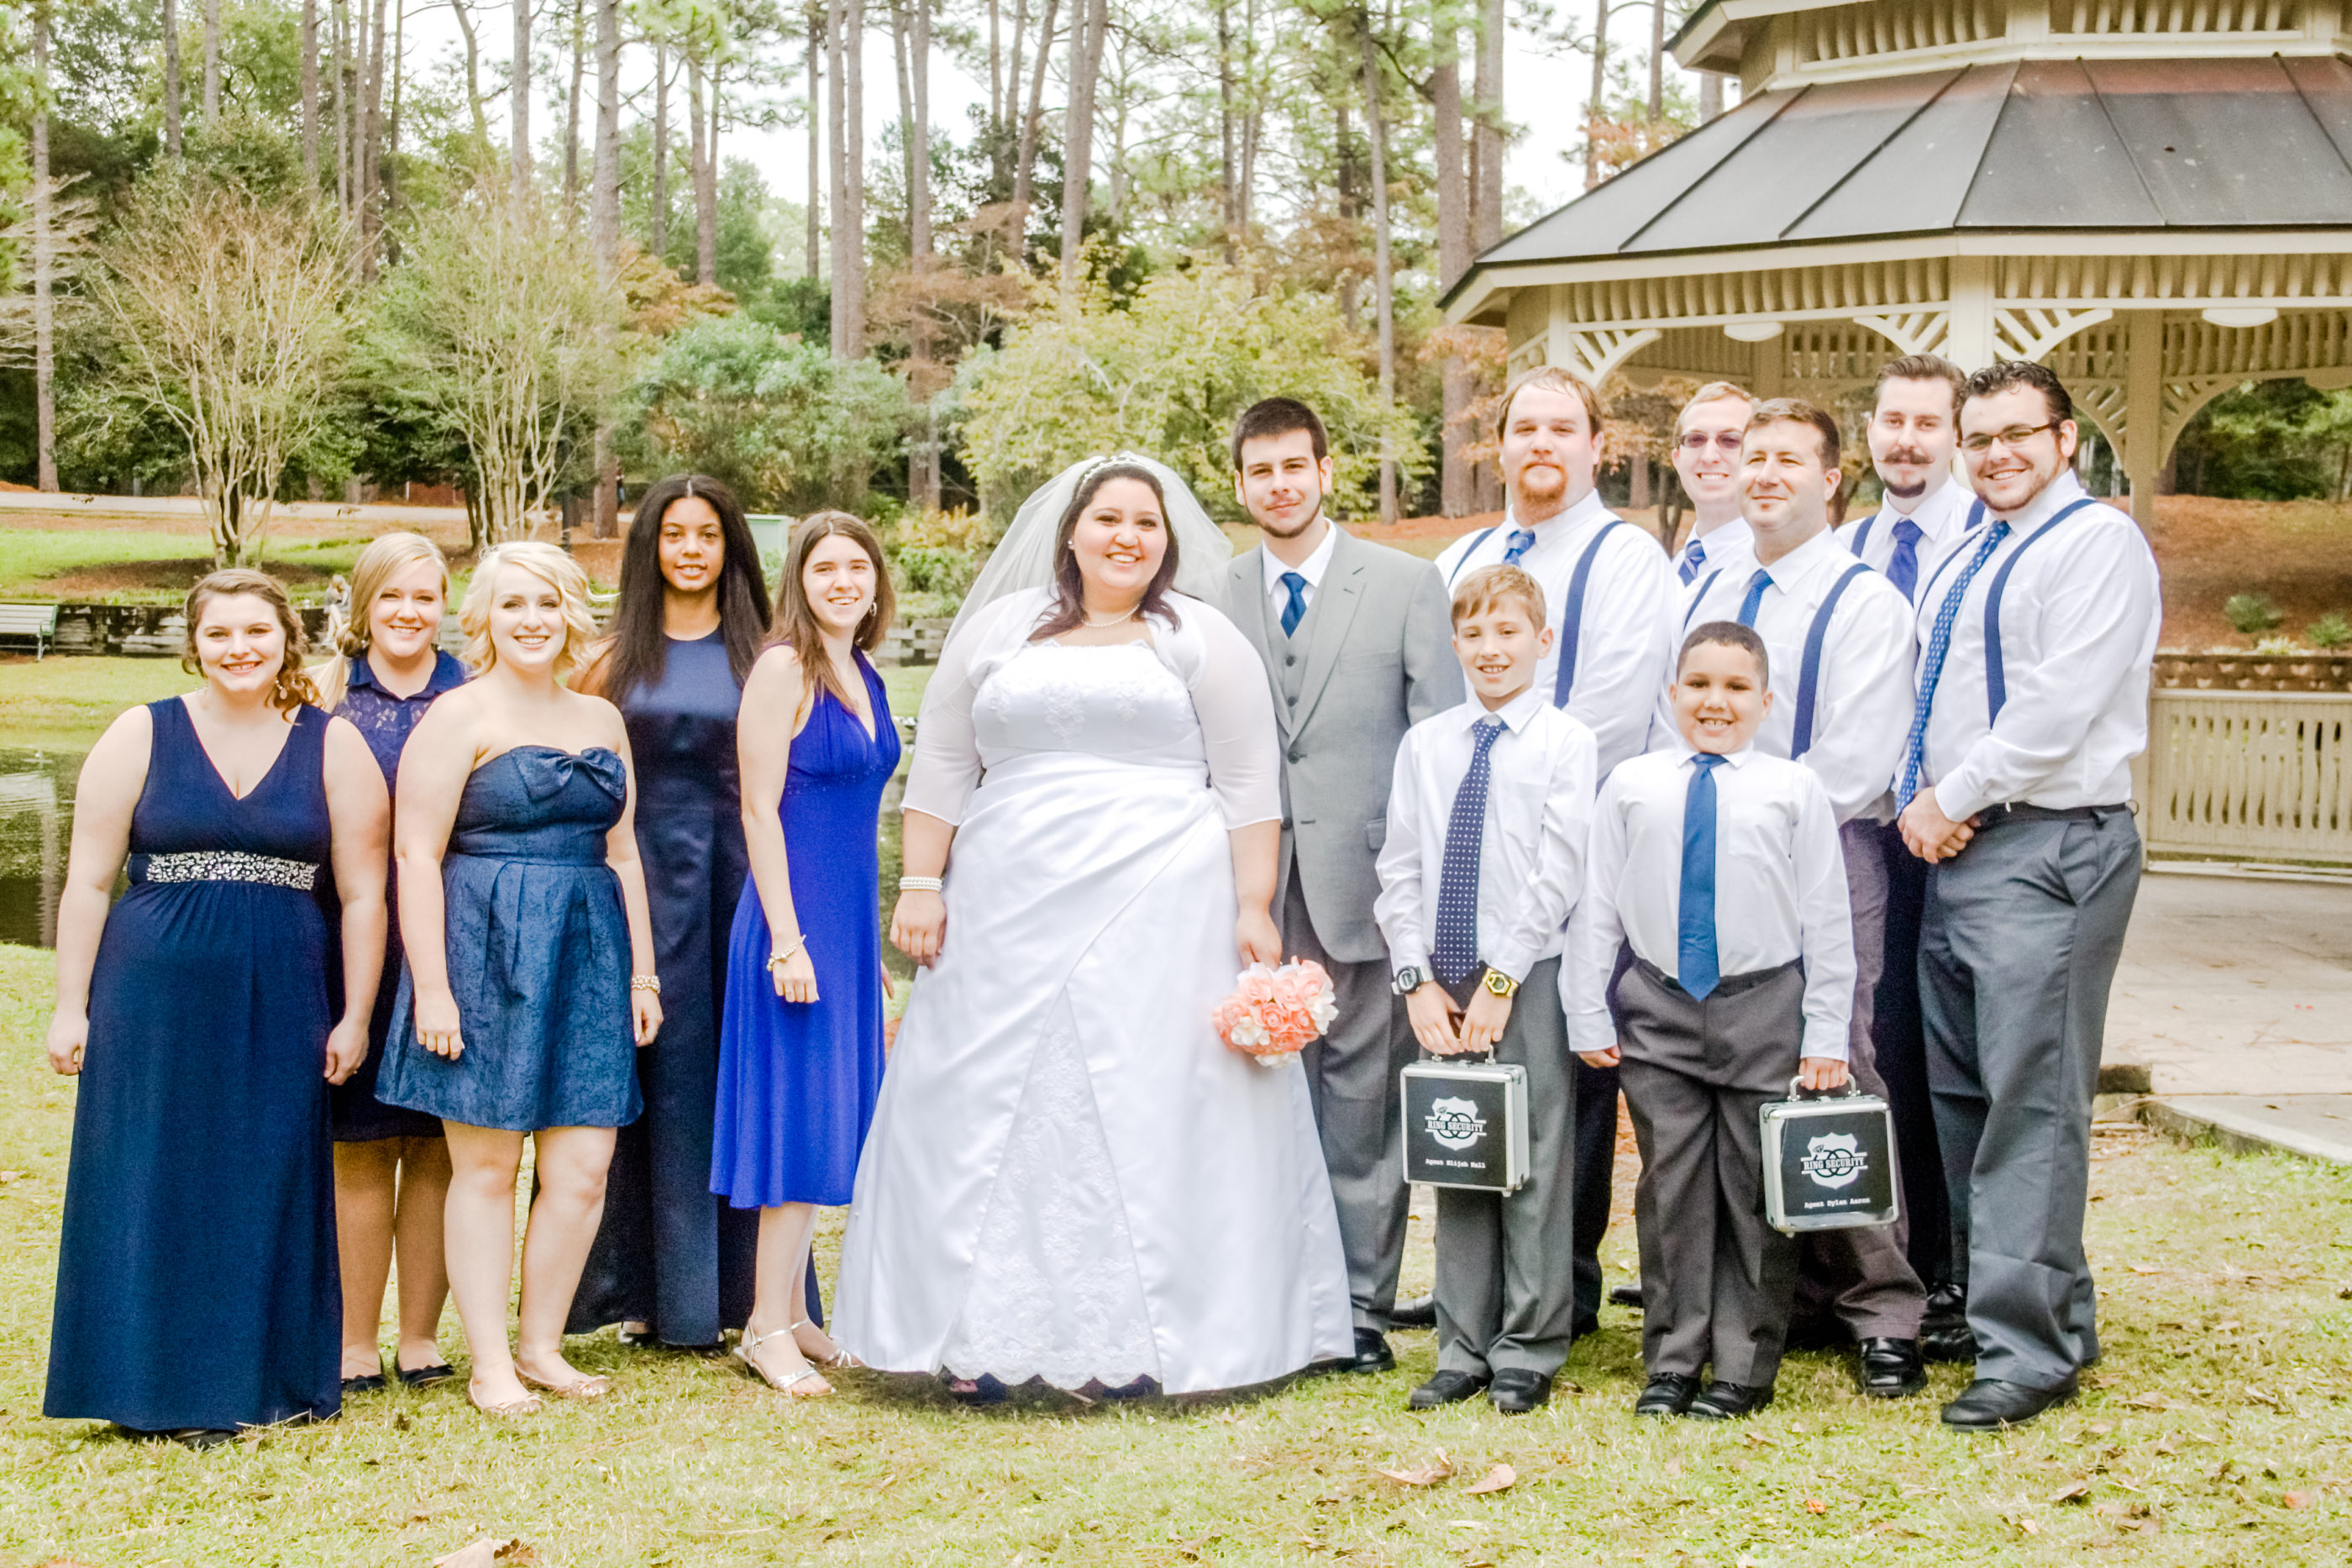 bridesmaids and groomsmen with ring bearers and wedding couple in front of gazebo